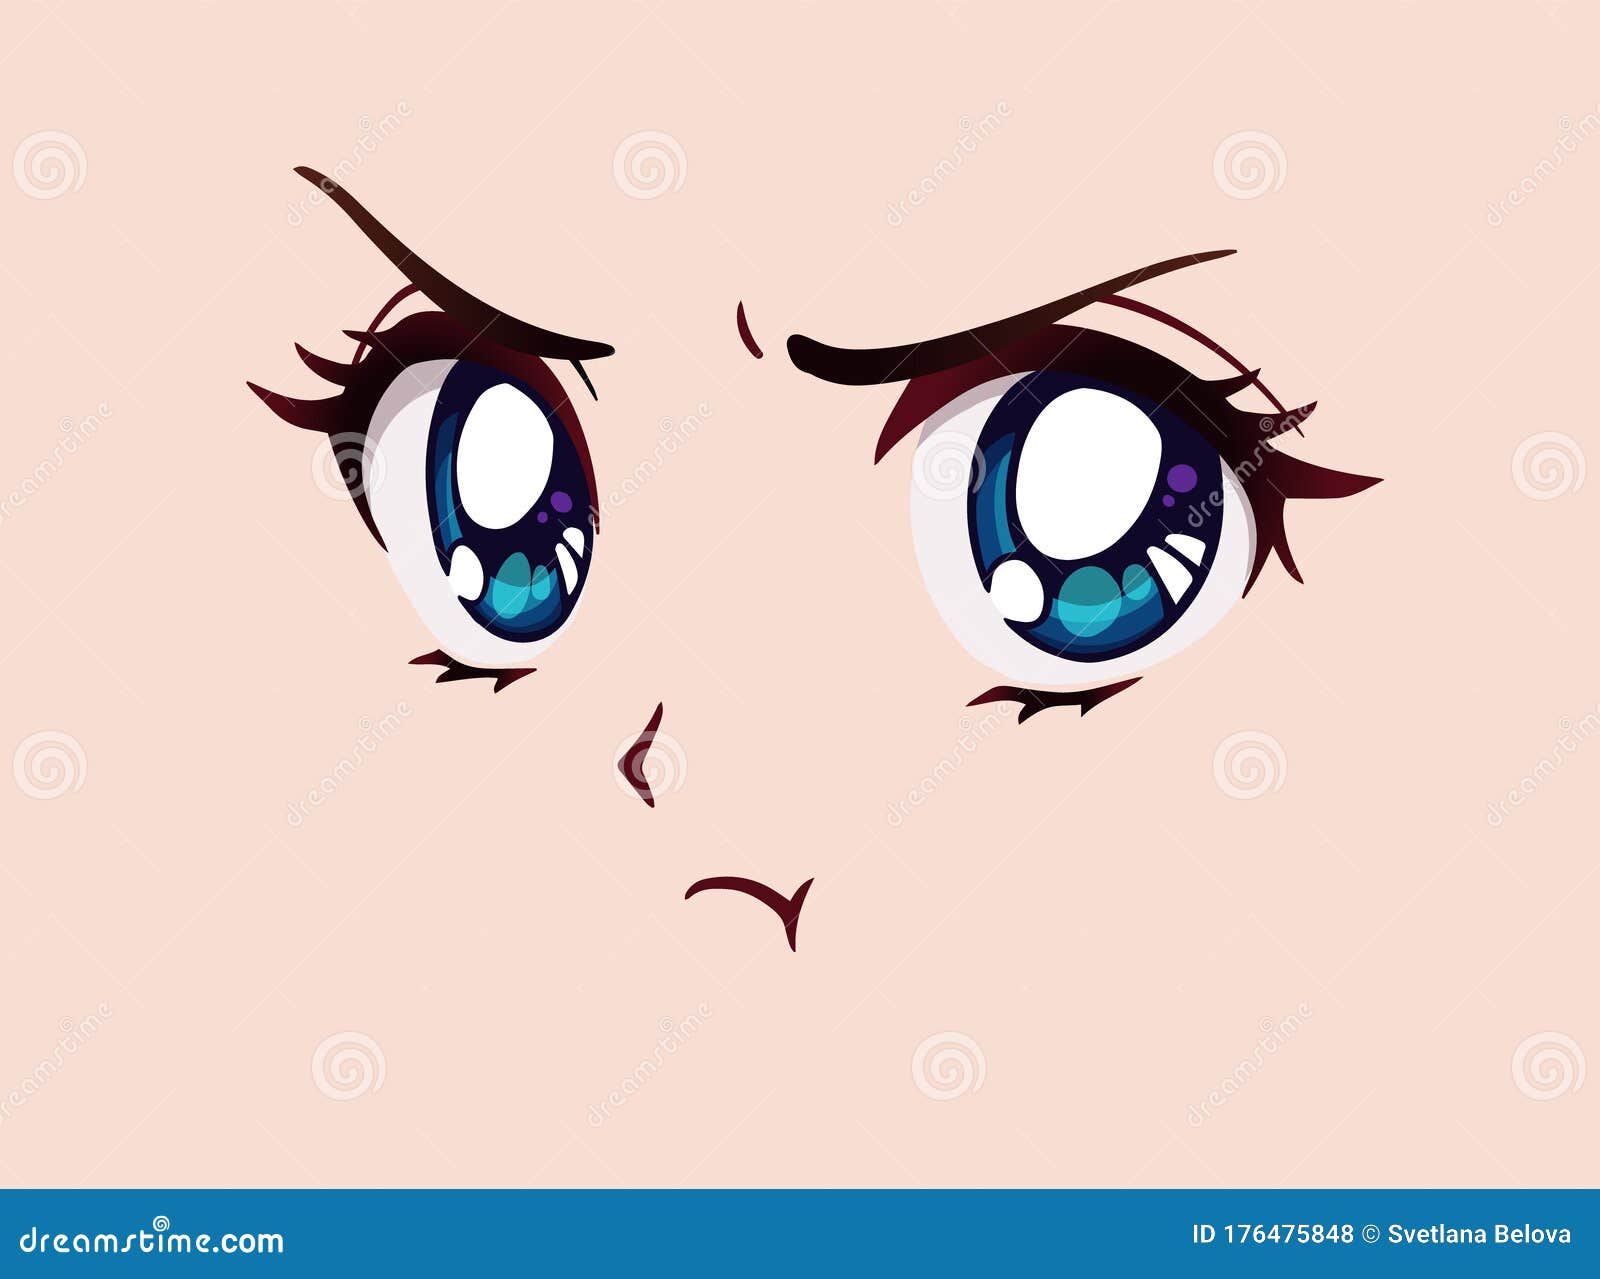 Anime Mouth Vector Art, Icons, and Graphics for Free Download